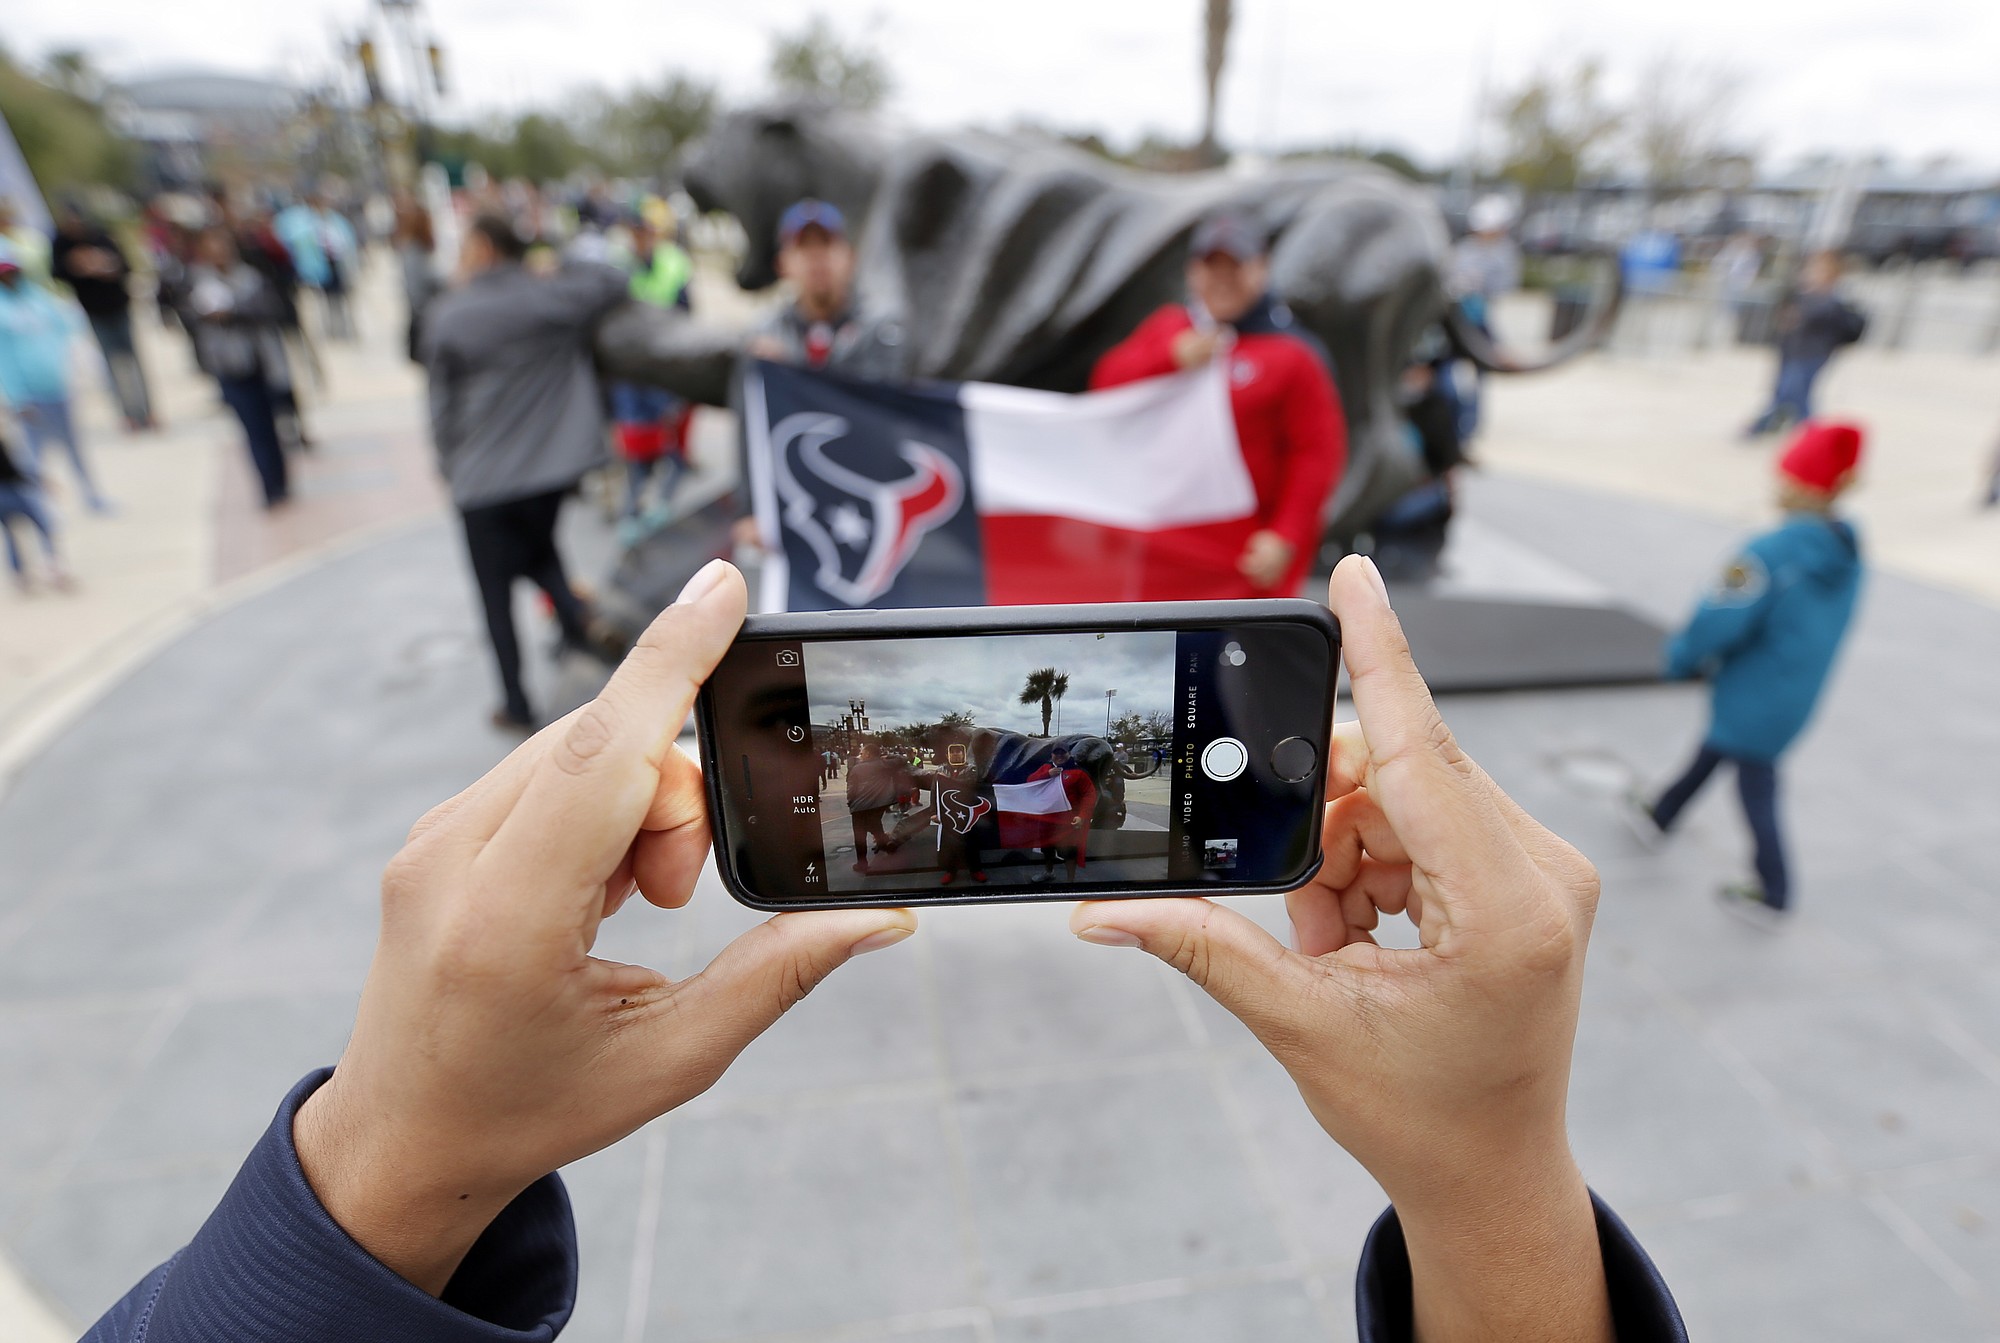 Houston Texans fan Erick Salgado takes a photo with his cellphone of his brother Andres Salgado, left, and his cousin Victor Ticas, right, Dec. 7 before the start of a football game in Jacksonville, Fla.